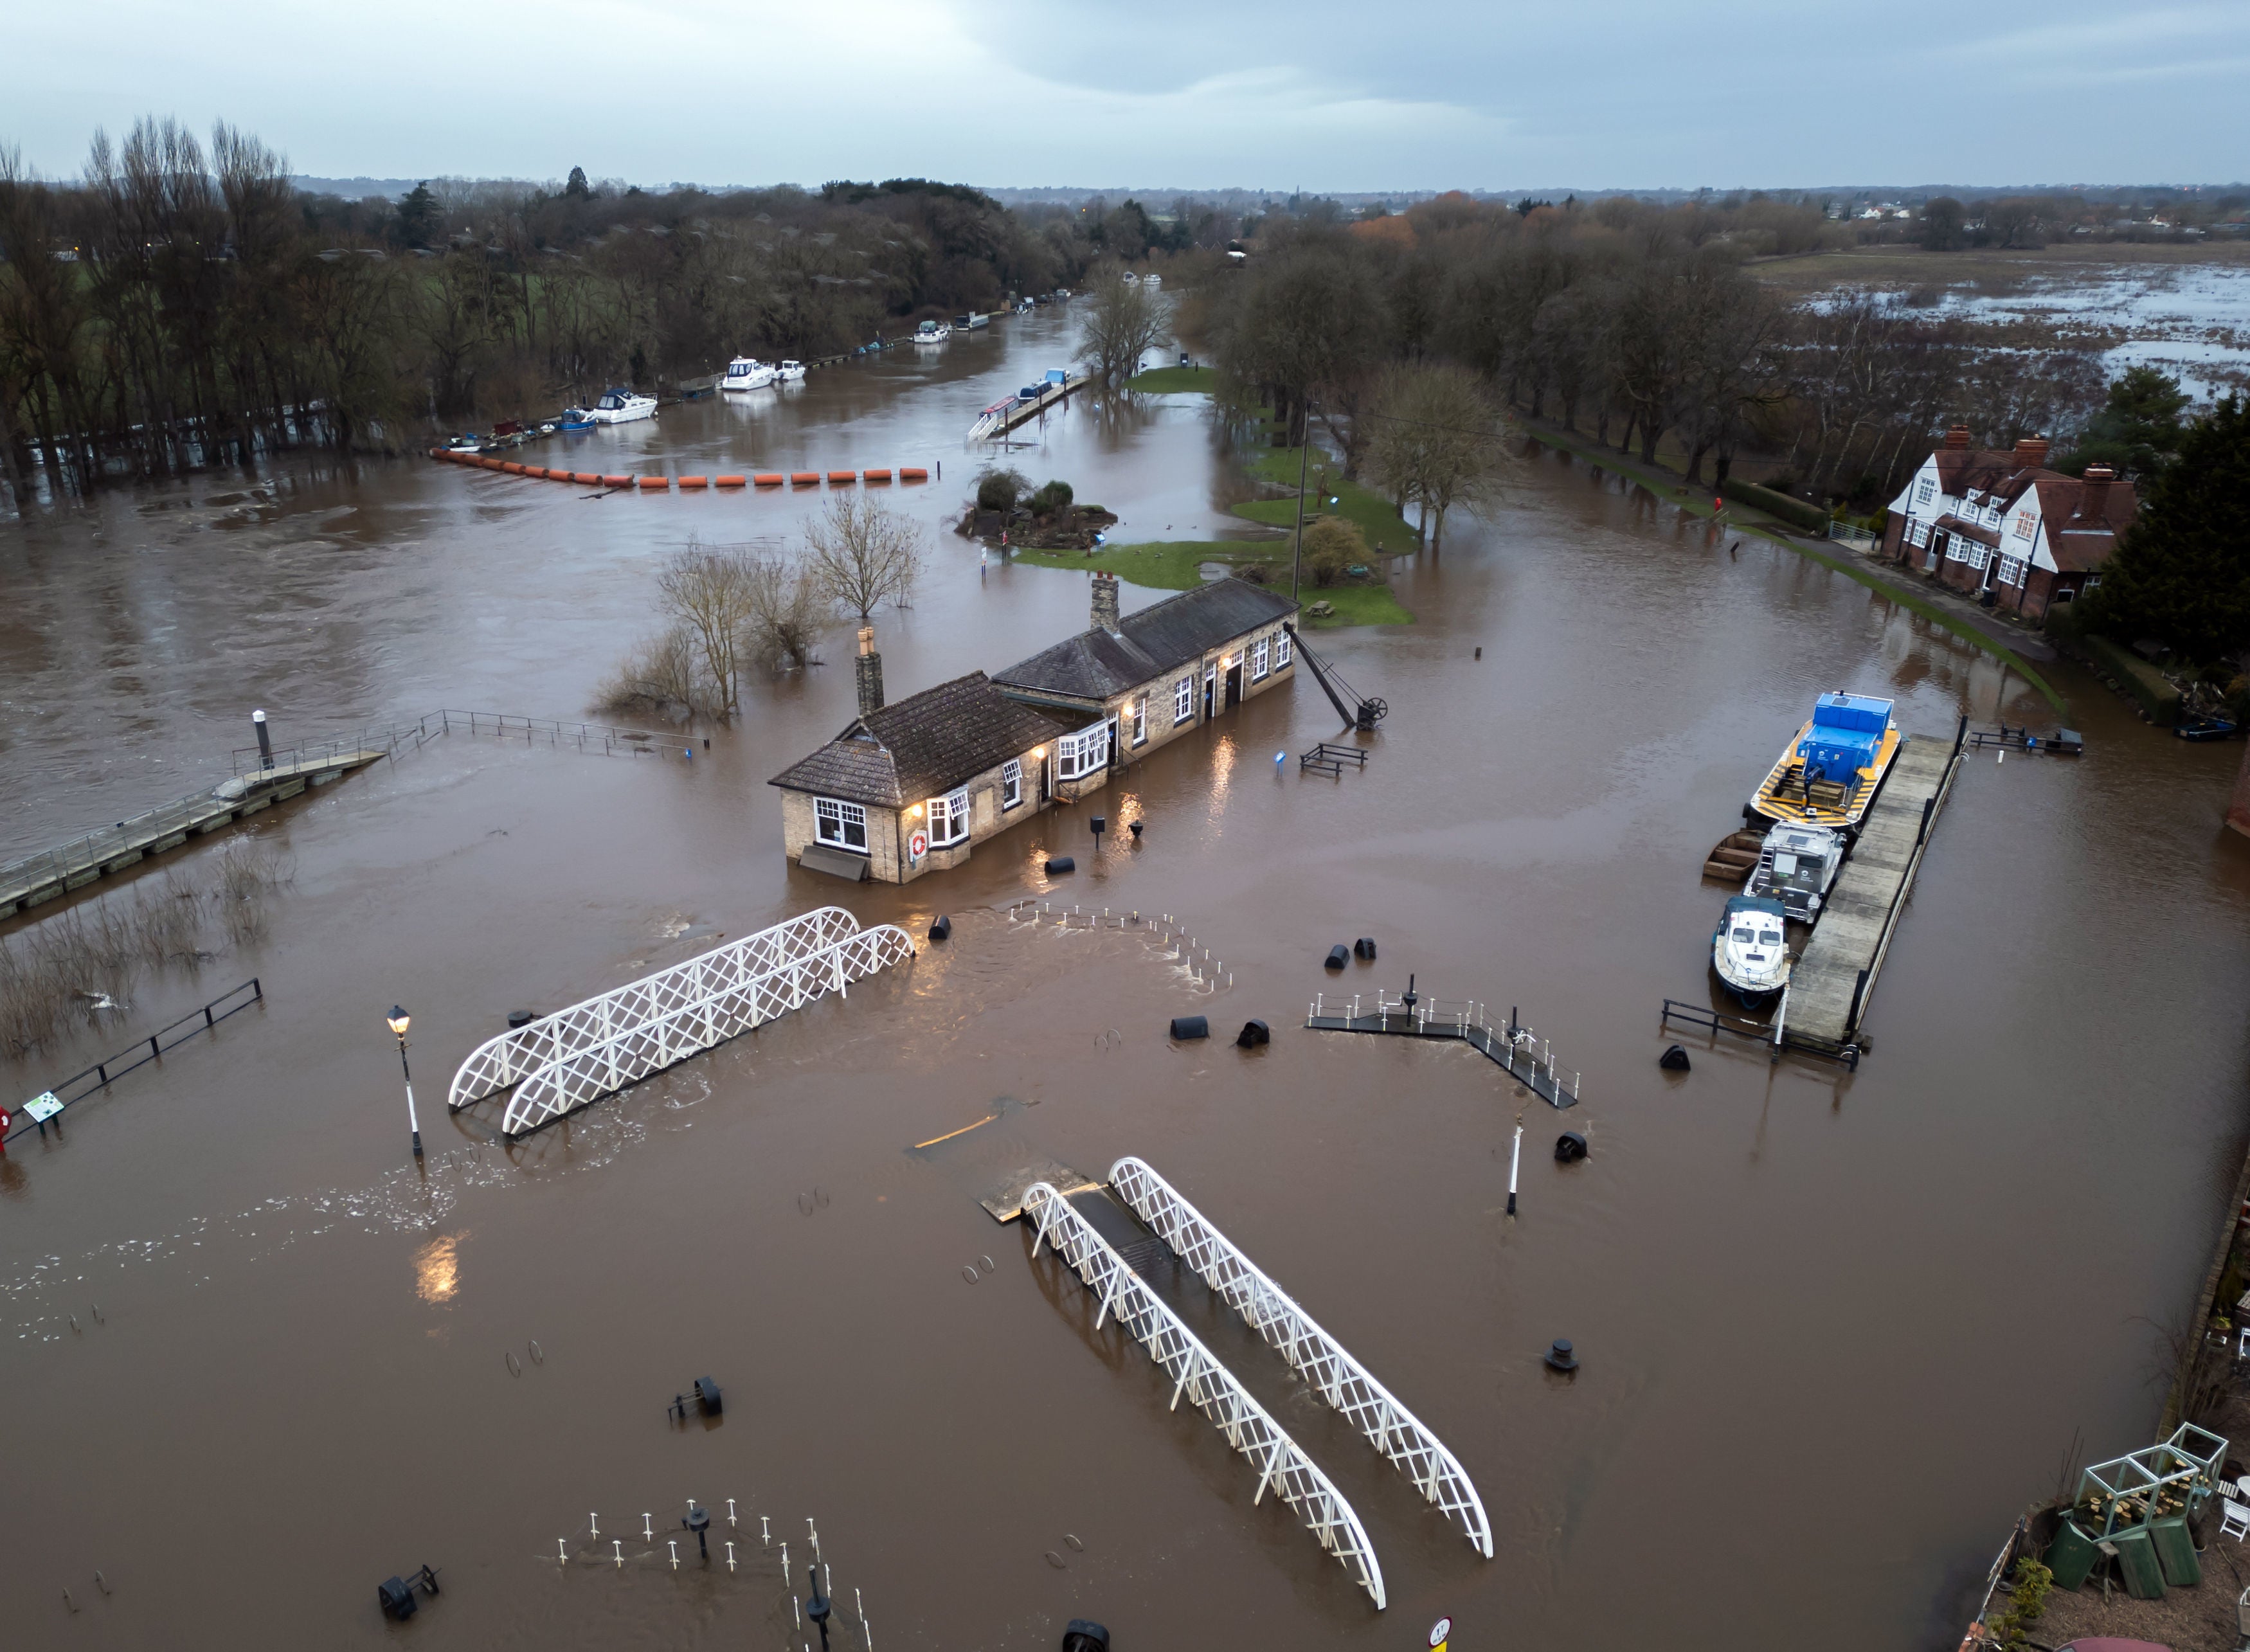 More than 100 flood warnings and alerts remain in place across the UK, as flooding is still present in parts of York and thousands remain affected by power cuts